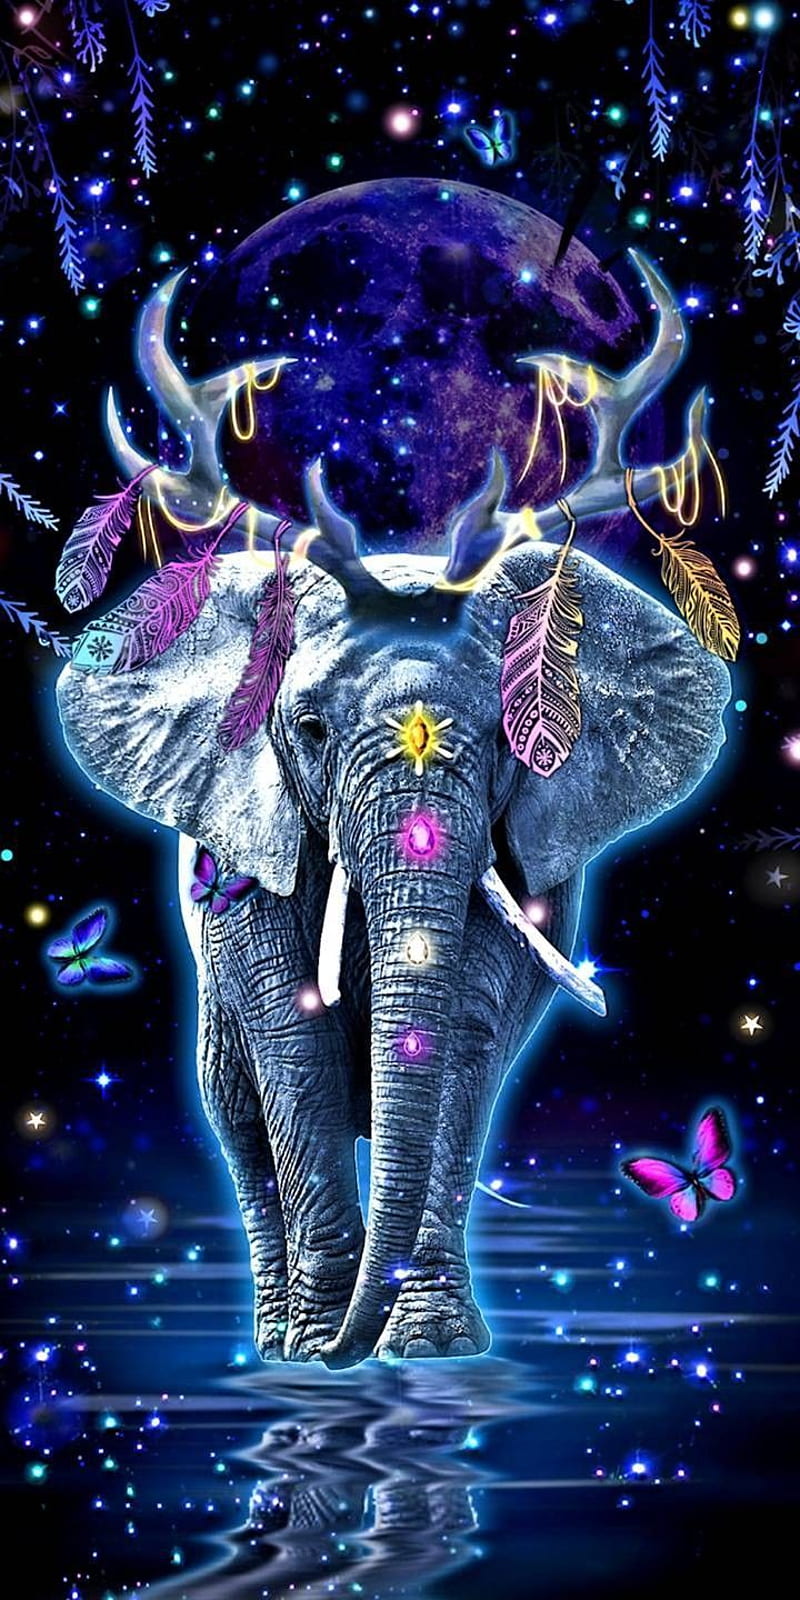 IPhone wallpaper of a neon elephant with antlers and feathers walking through a galaxy - Elephant